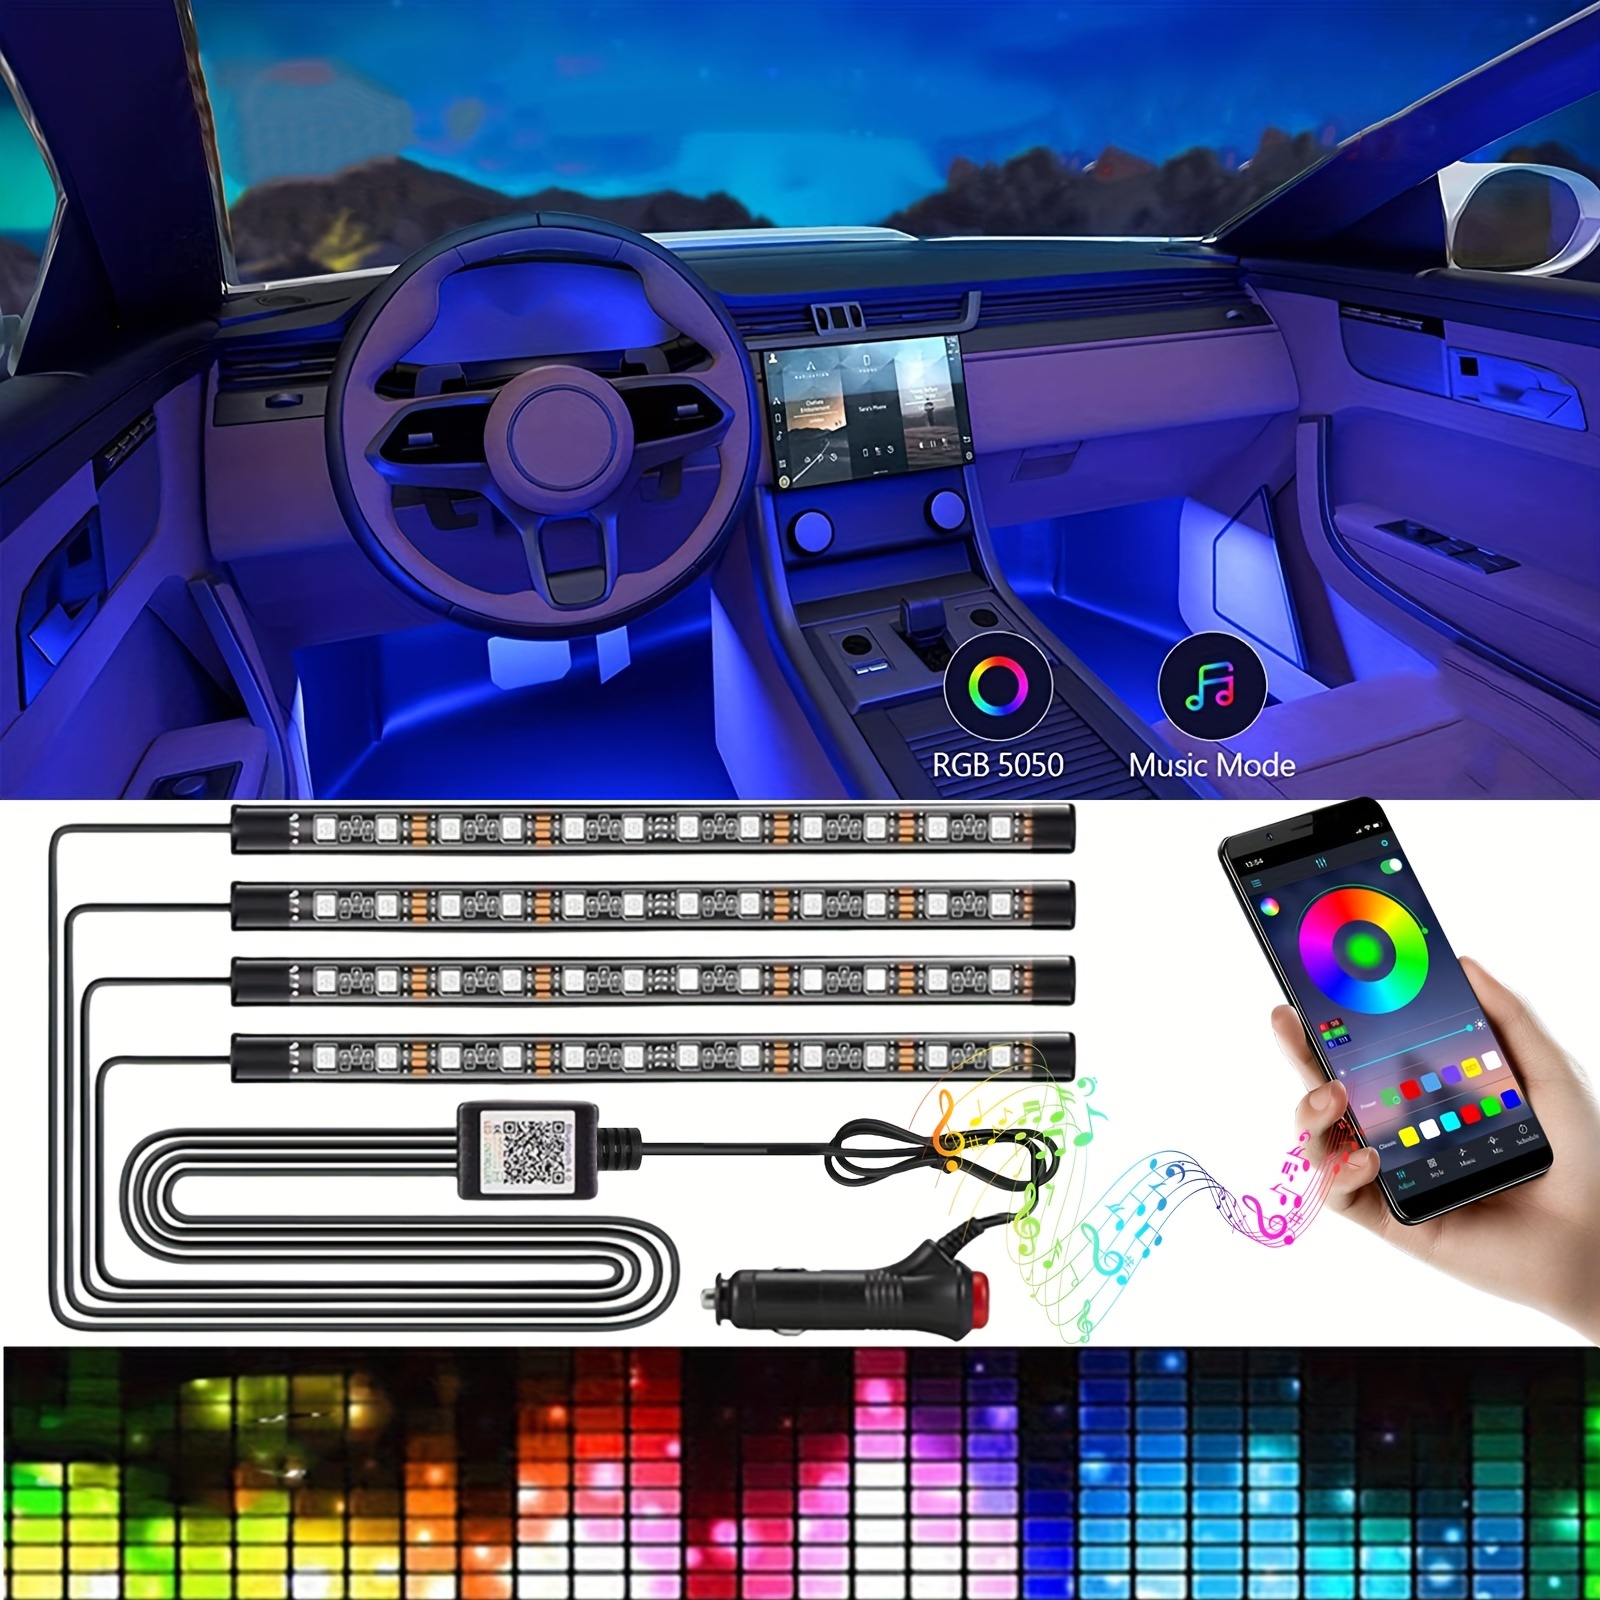 Interior Car Lights RGB Led Lights for Car with Music Sync Mode and DIY  Mode, 4 Pcs and 48 Car LED Strip Lights with Smart APP Control for Cars,  Trucks, SUVs with